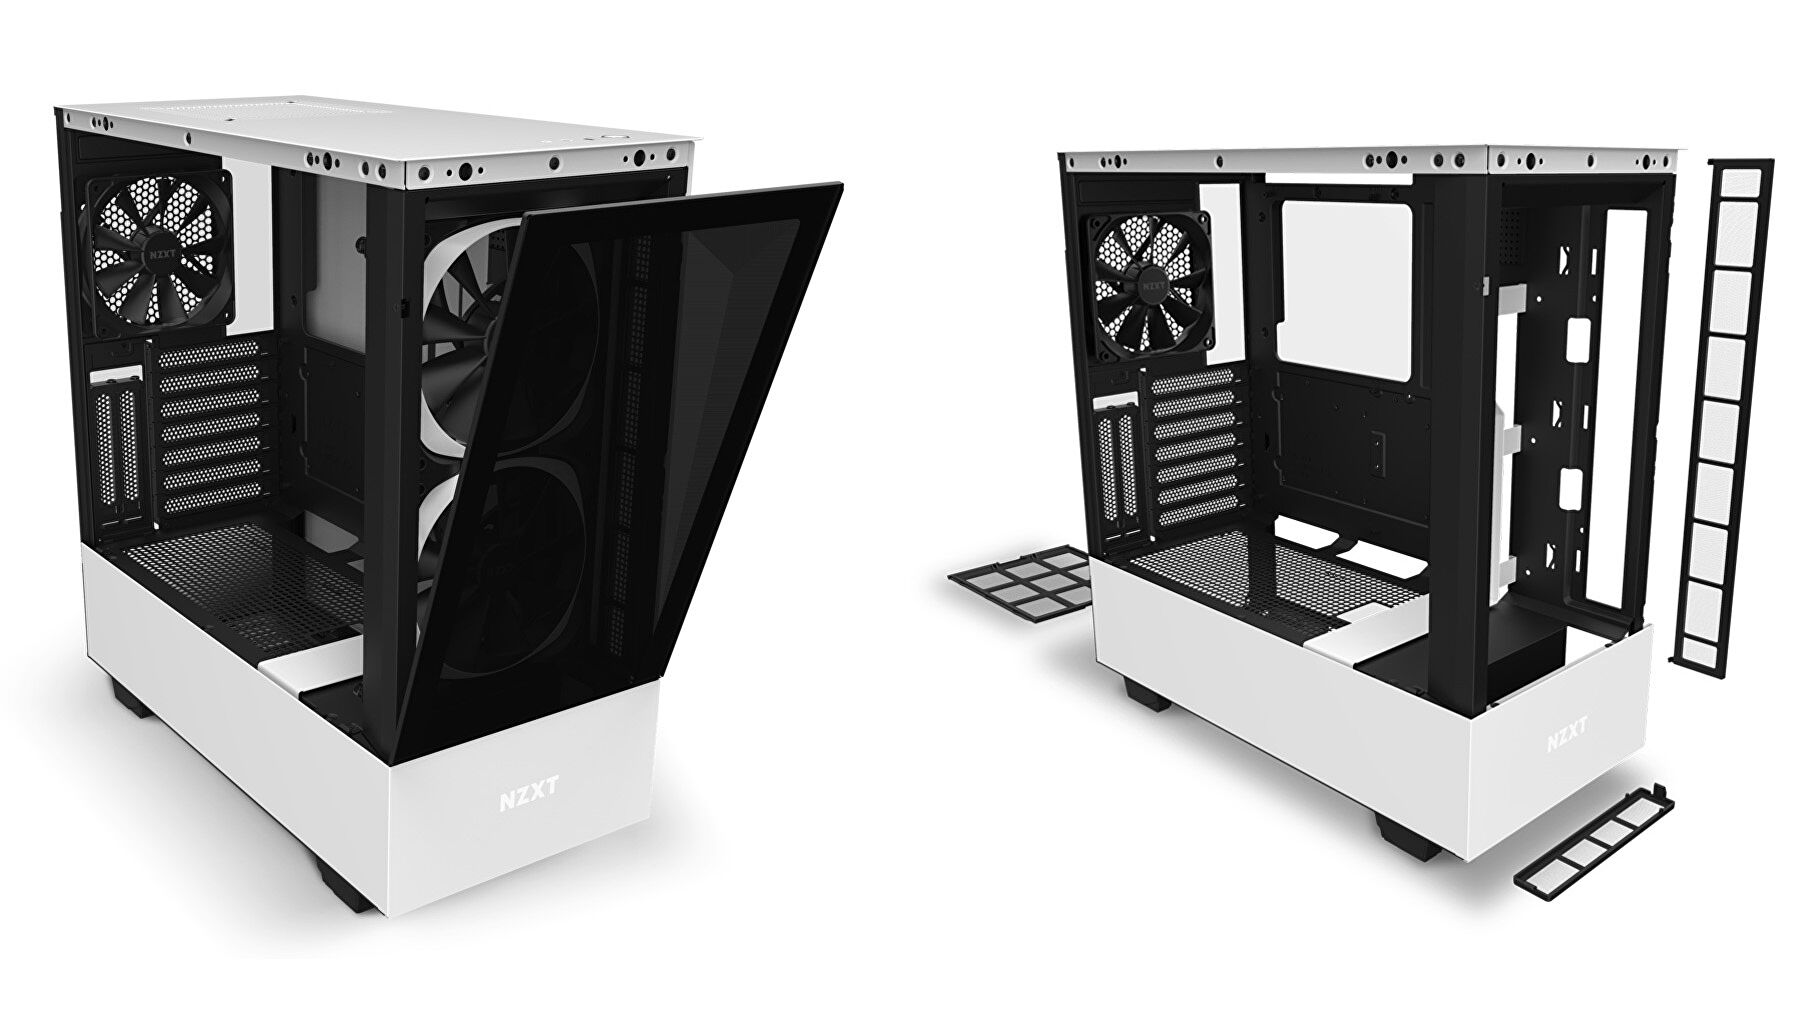 Grab NZXT's H510 Elite PC case for $80 after a 50% discount